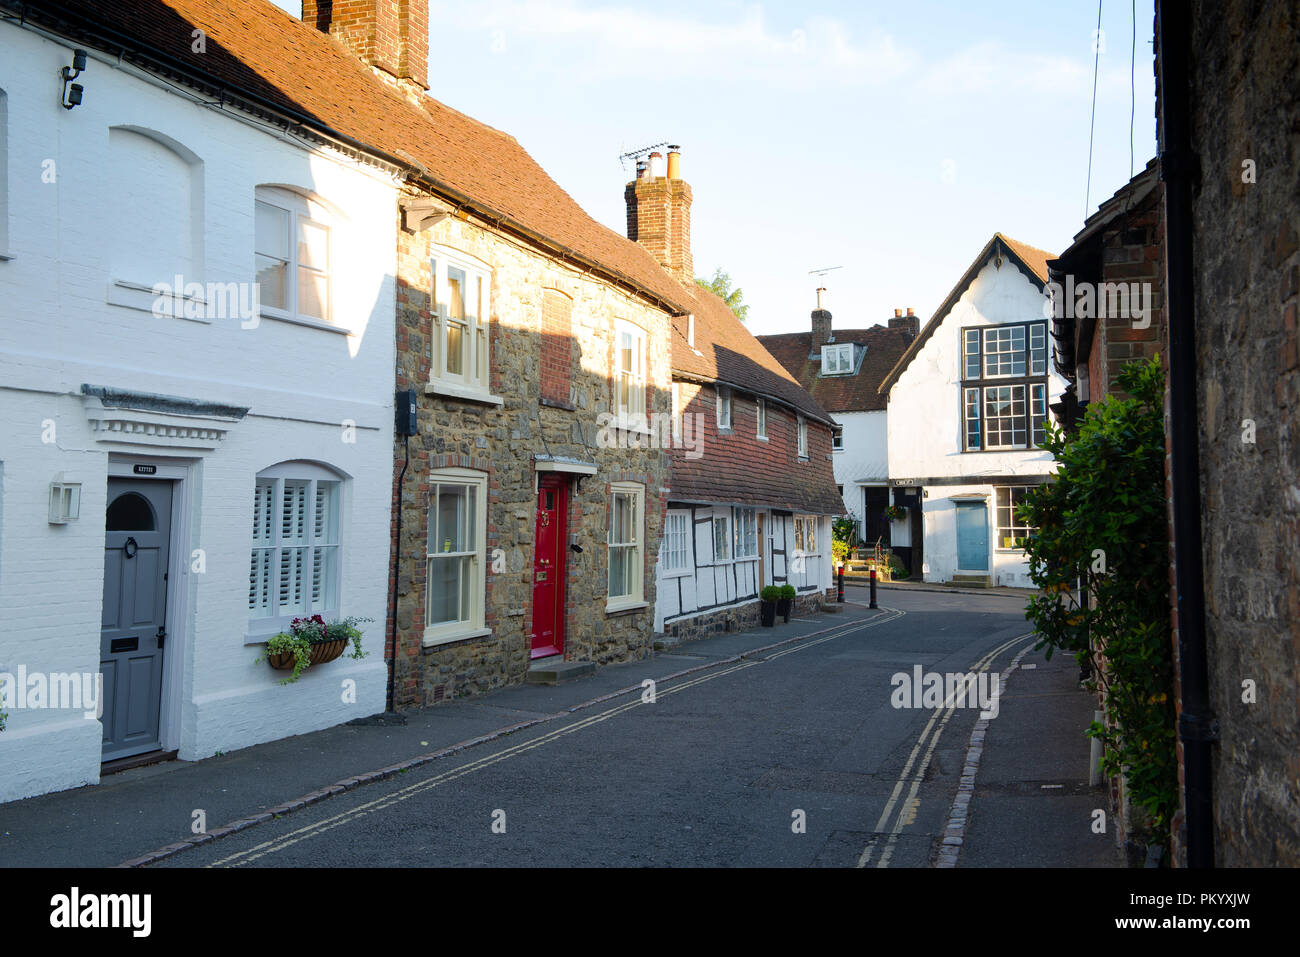 The village of Petworth in West Sussex on an early summer evening. Stock Photo